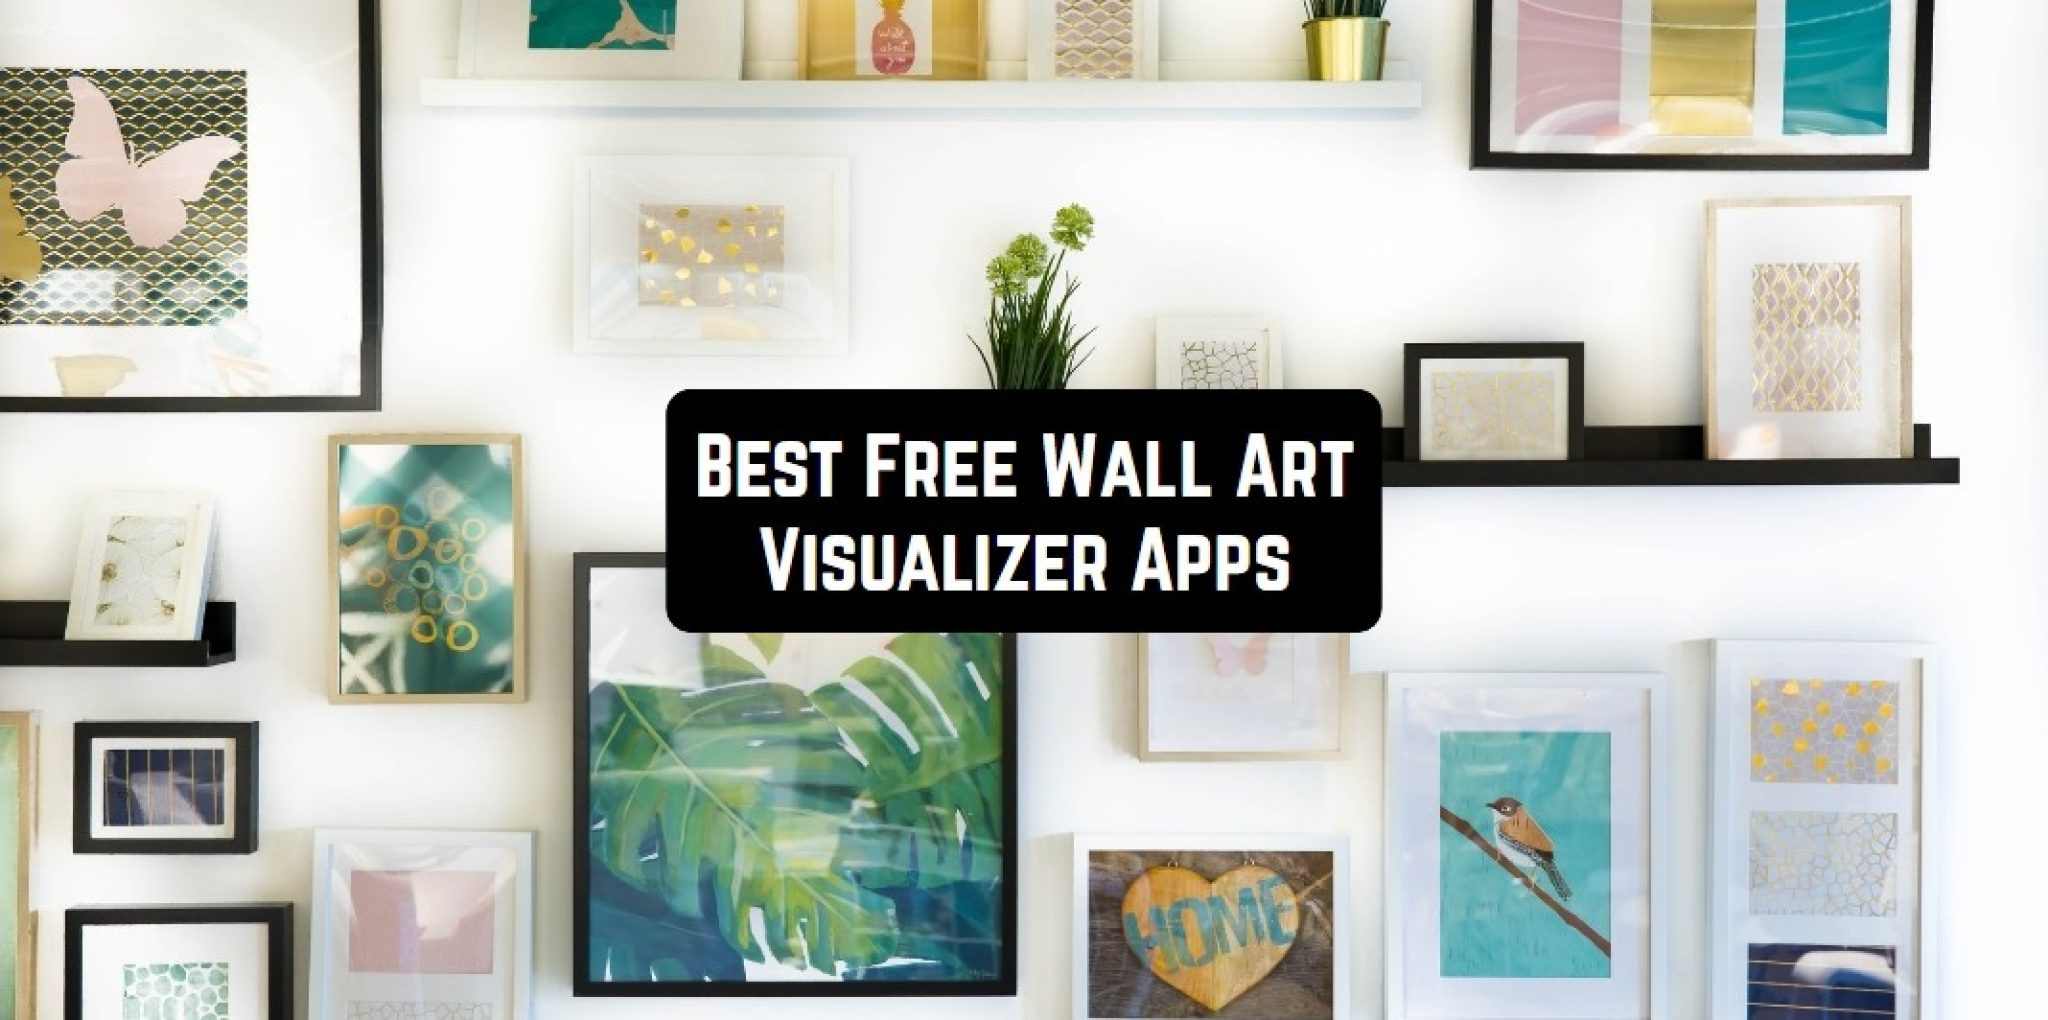 7 Free Wall Art Visualizer Apps for Android & iOS | Freeappsforme ...